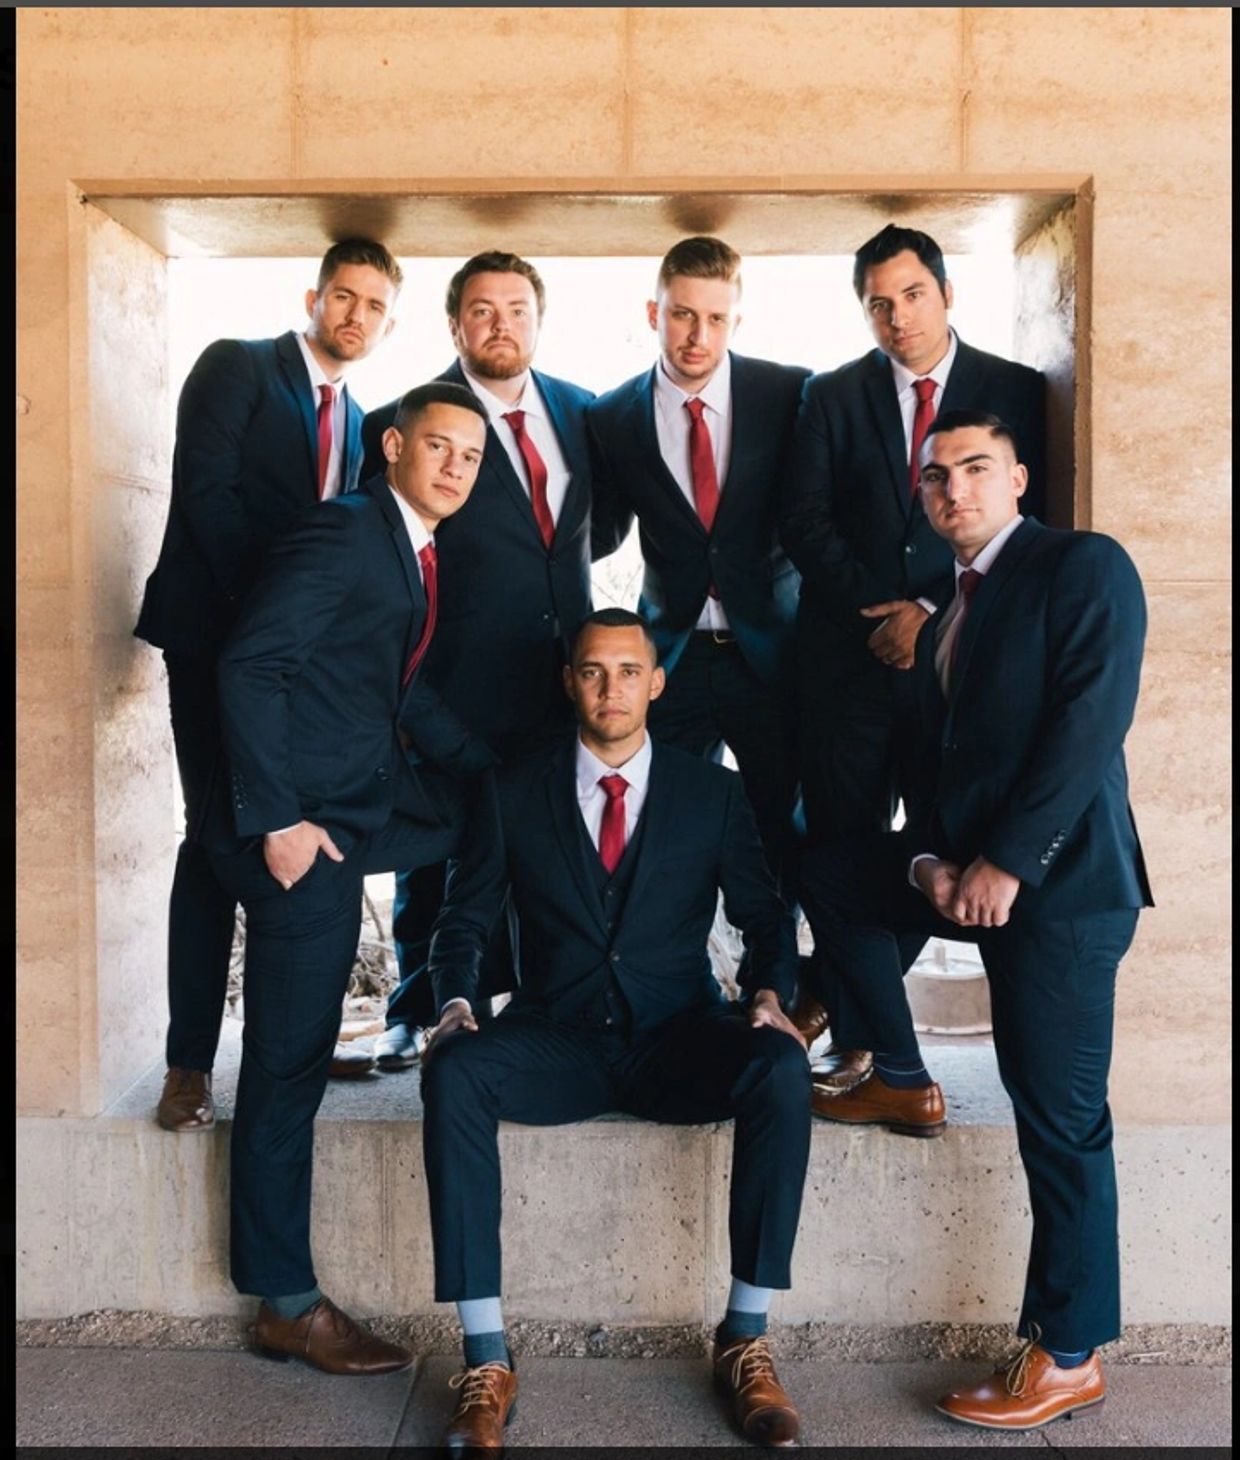 Groomsmen and groom with matching suits